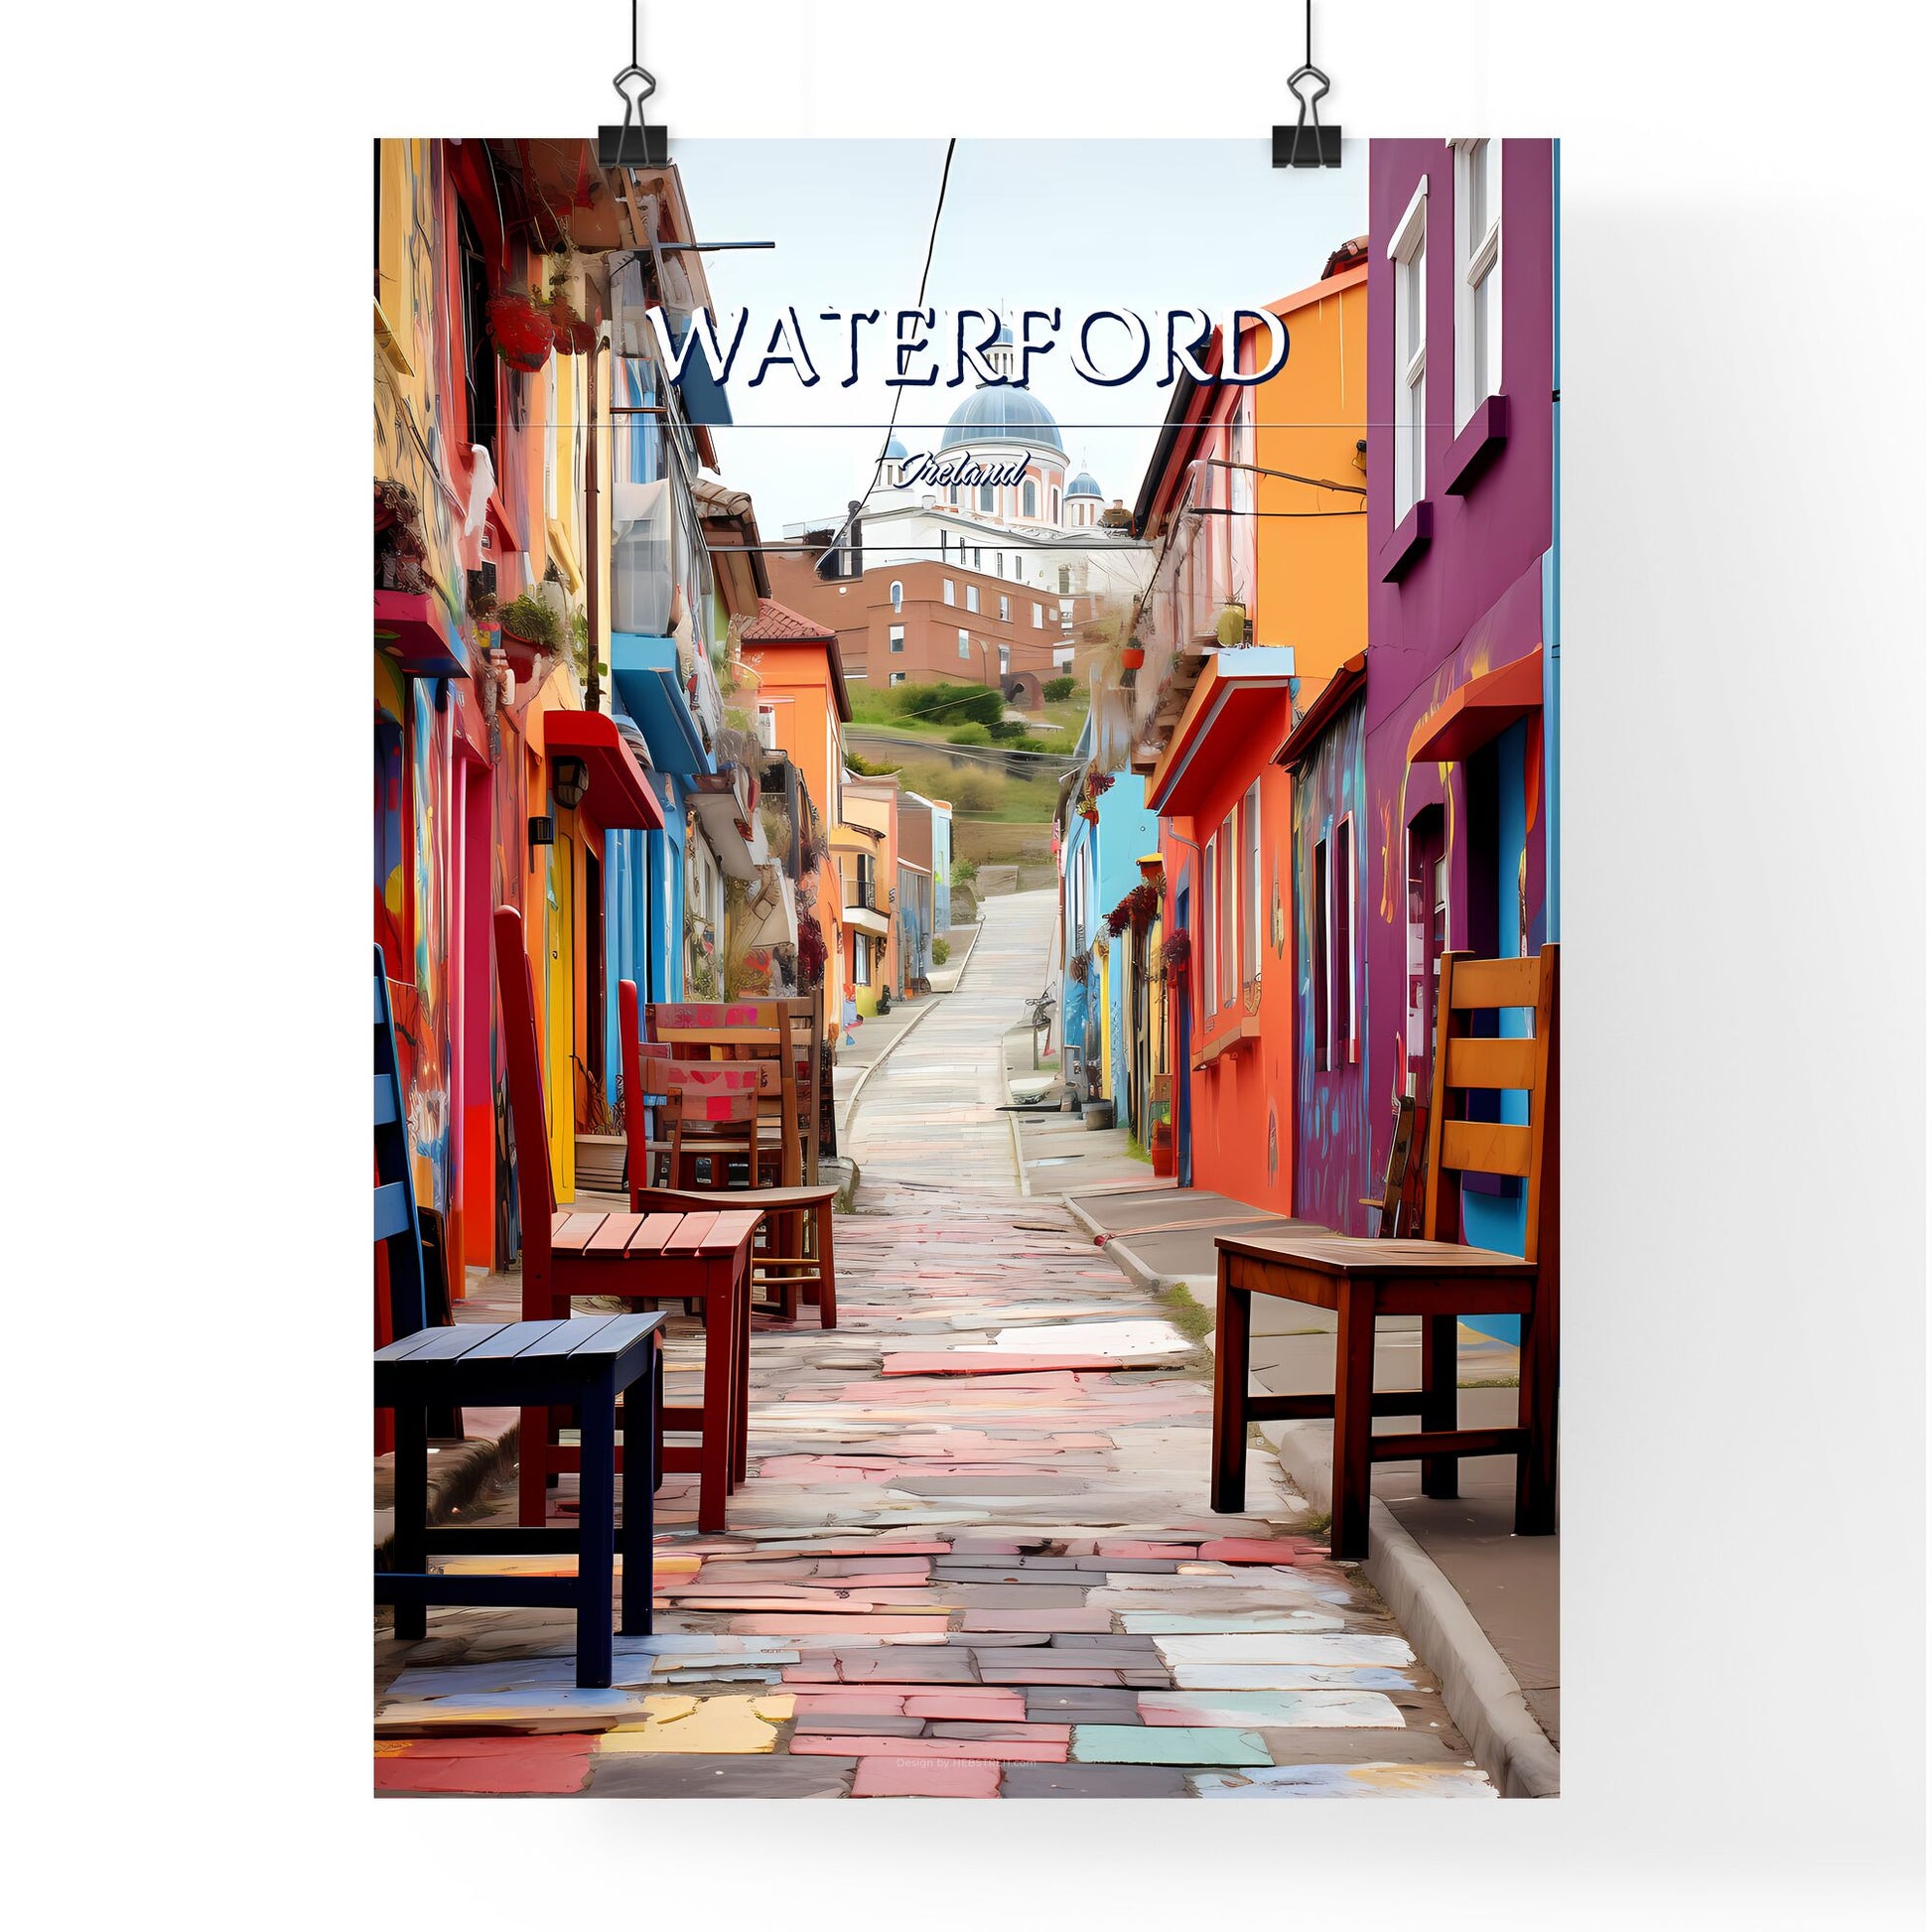 Waterford, Ireland - Art print of a colorful alley with chairs and tables Default Title